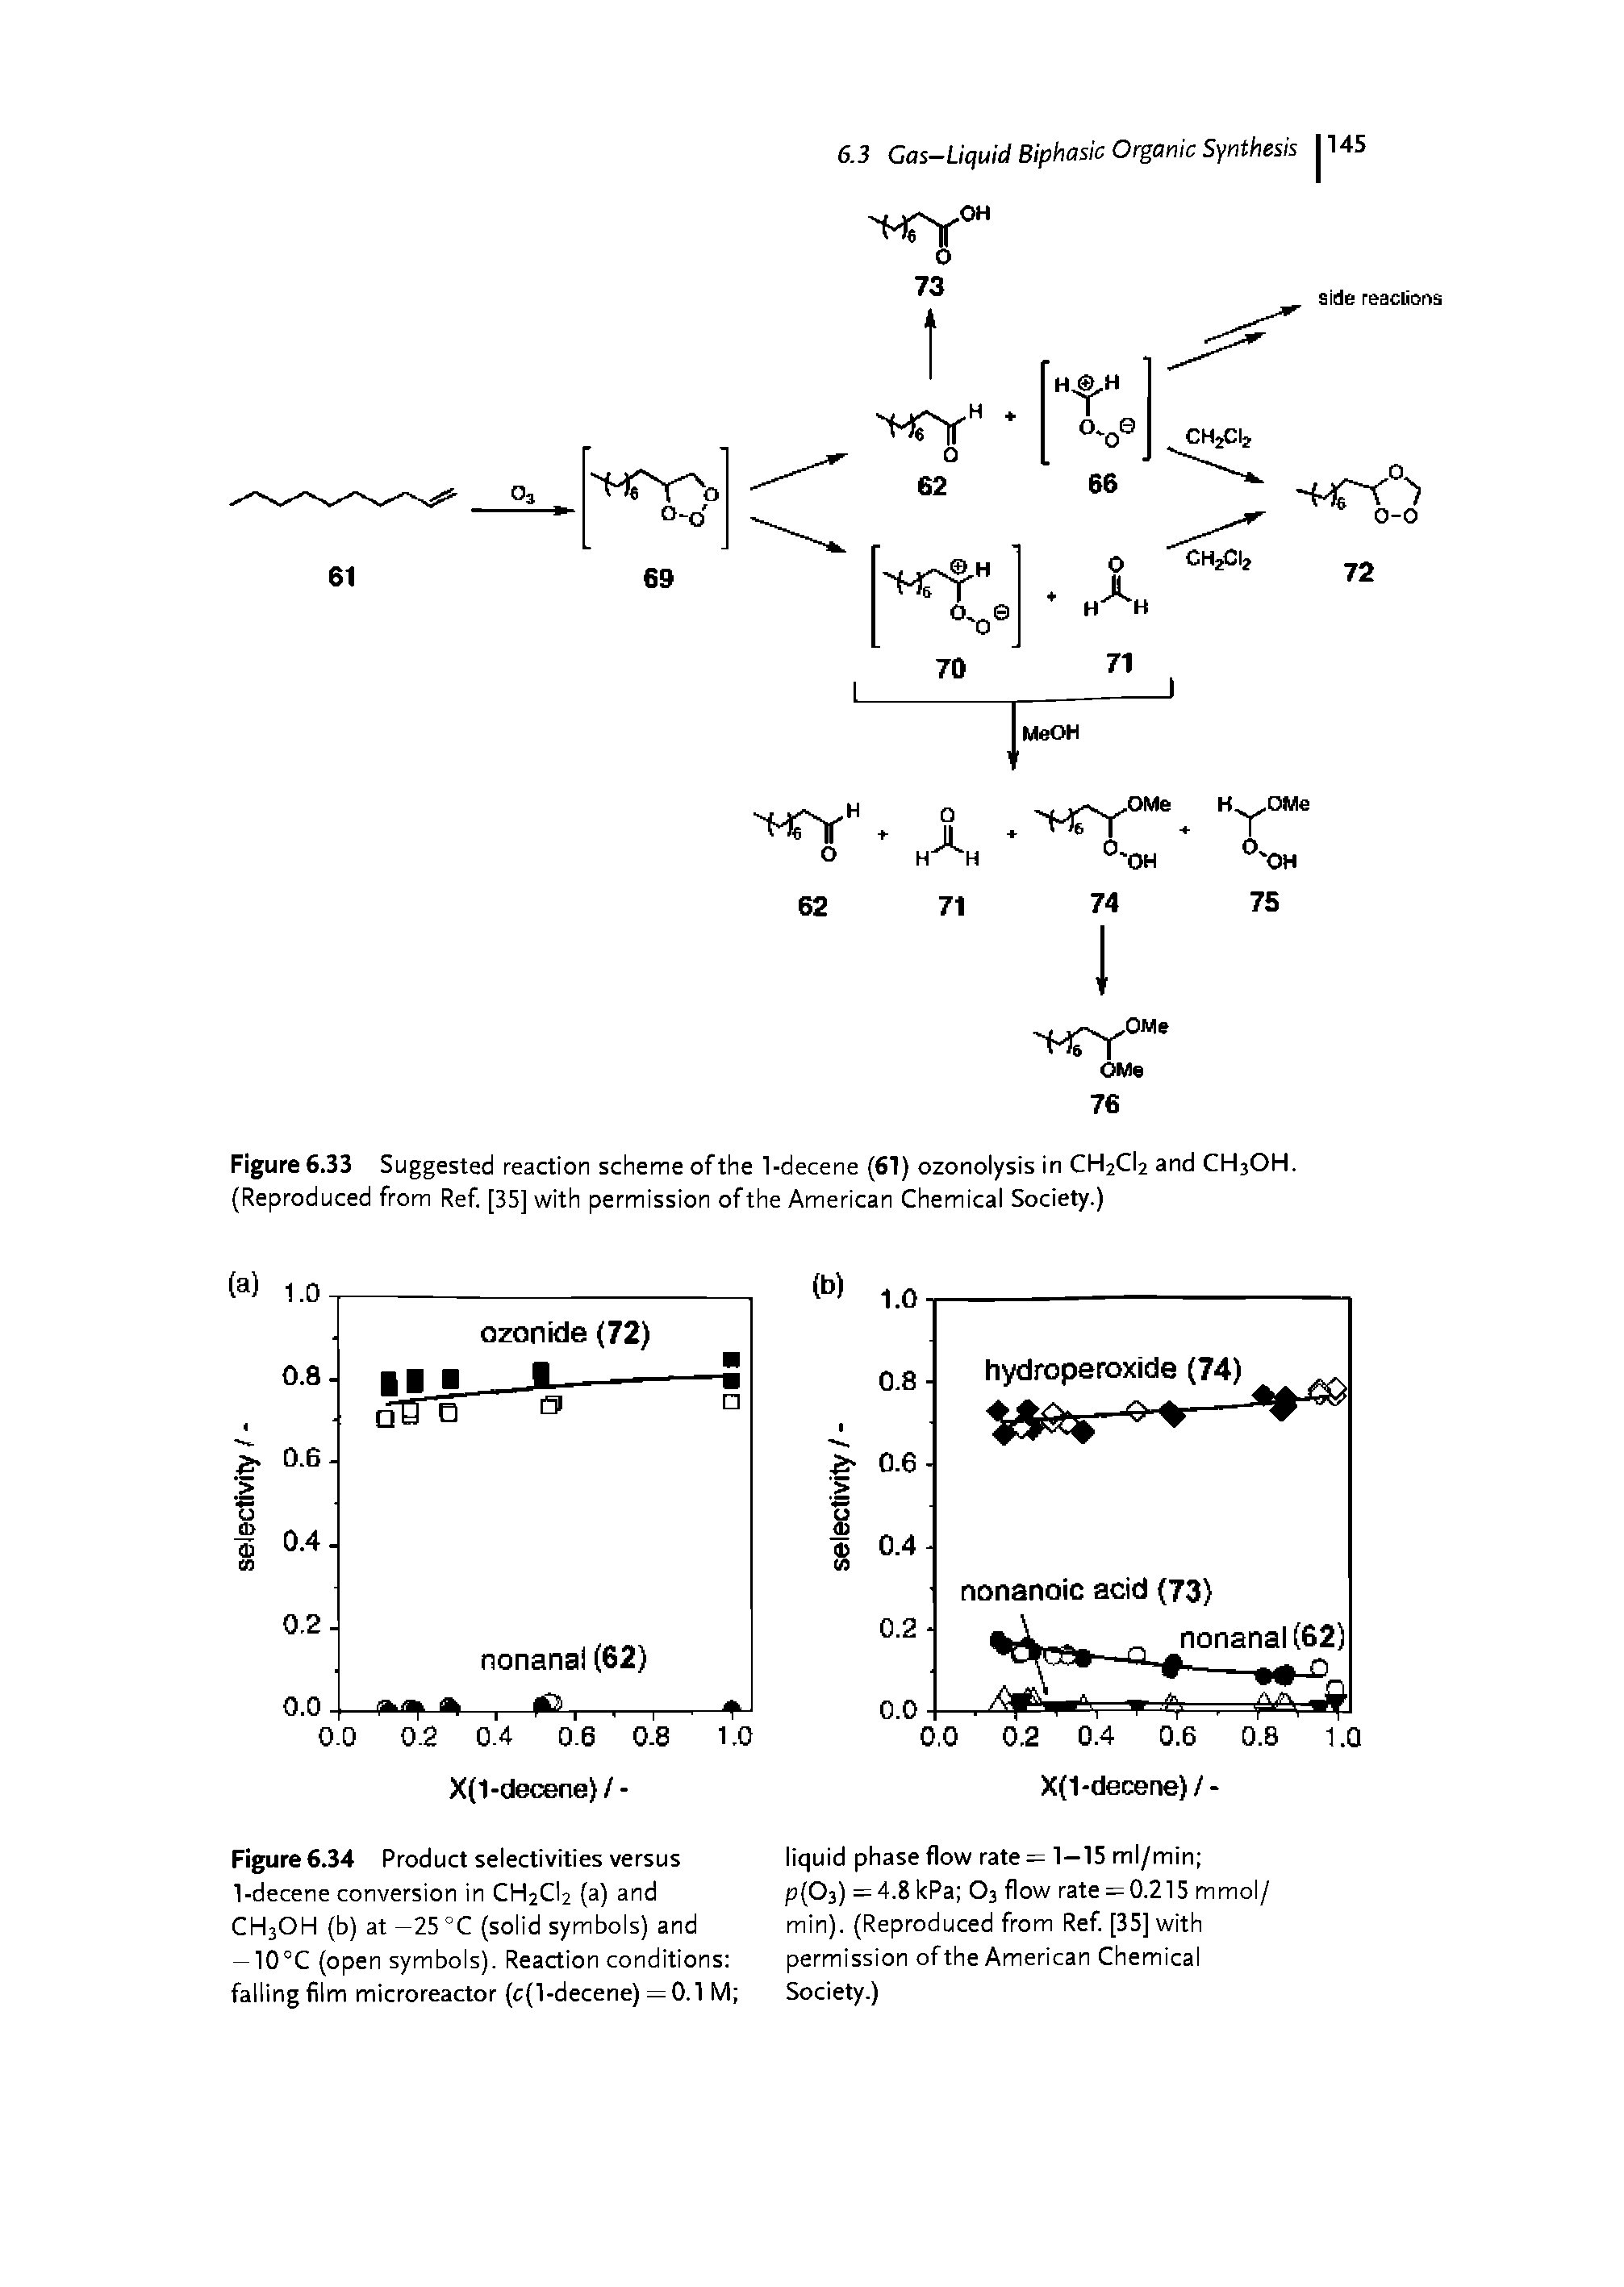 Figure 6.33 Suggested reaction scheme of the 1-decene (61) ozonolysis in CH2CI2 and CH3OH. (Reproduced from Ref [35] with permission of the American Chemicai Society.)...